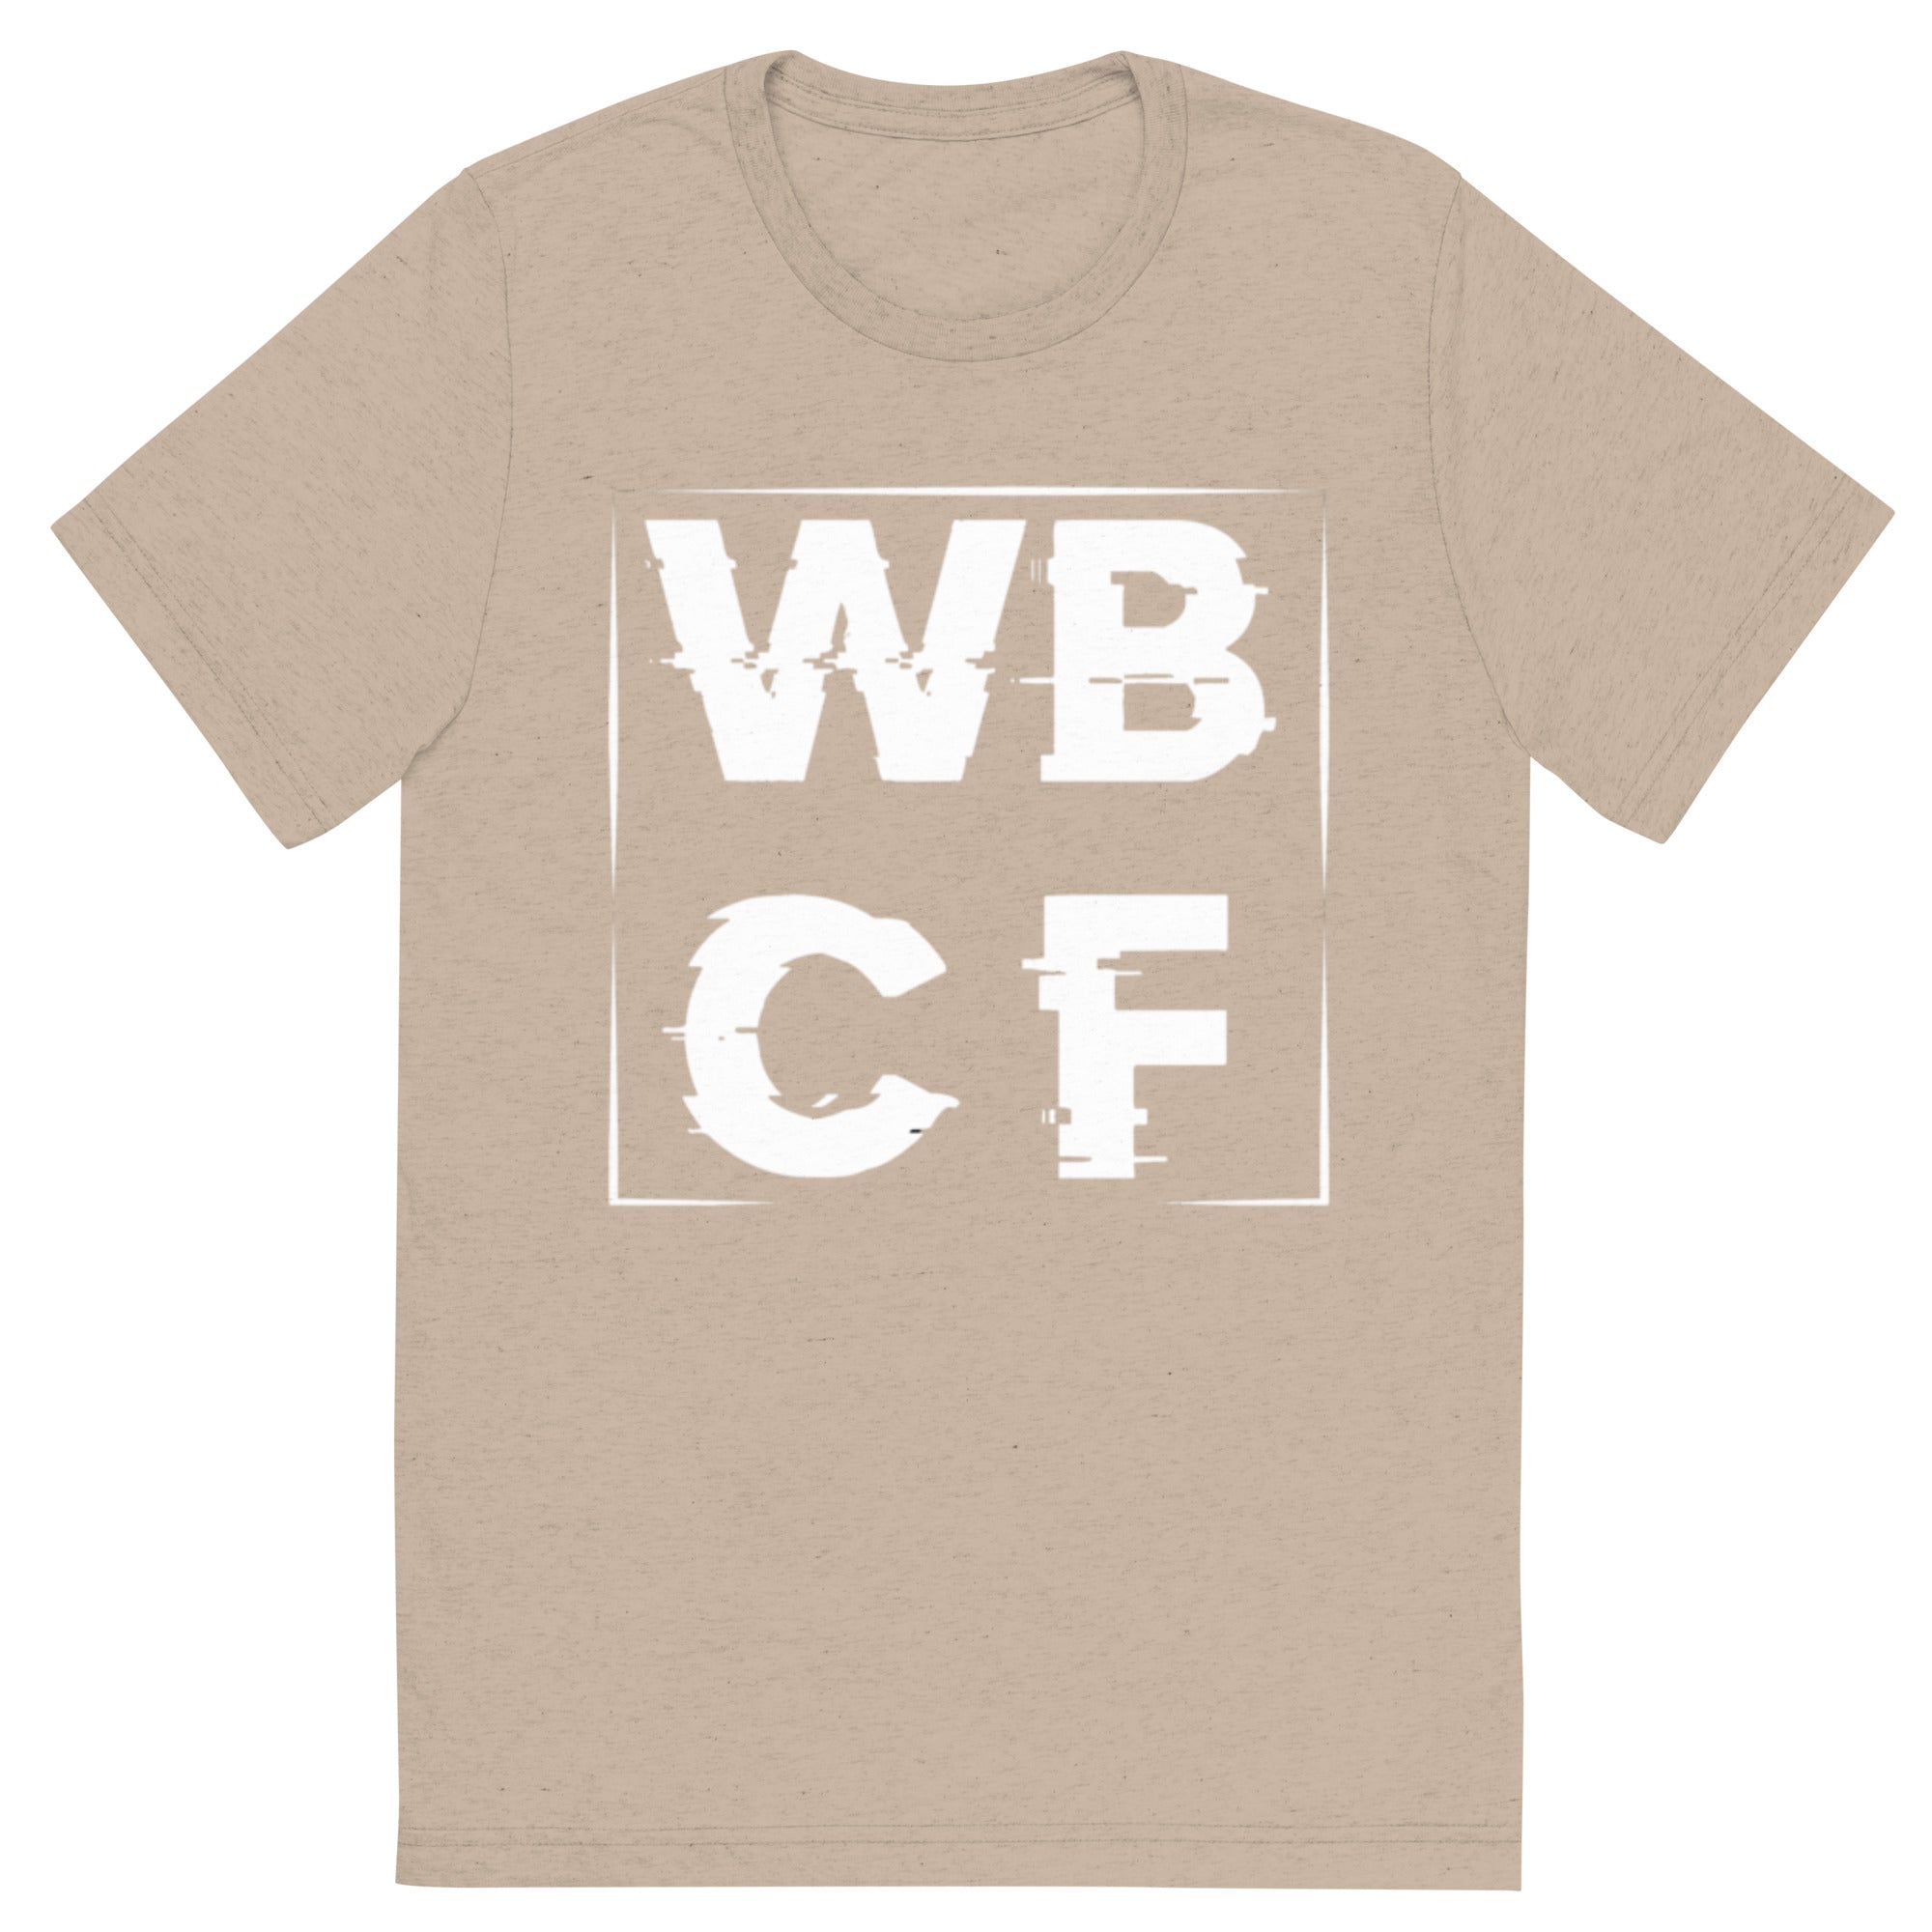 WBCF Shattered Text